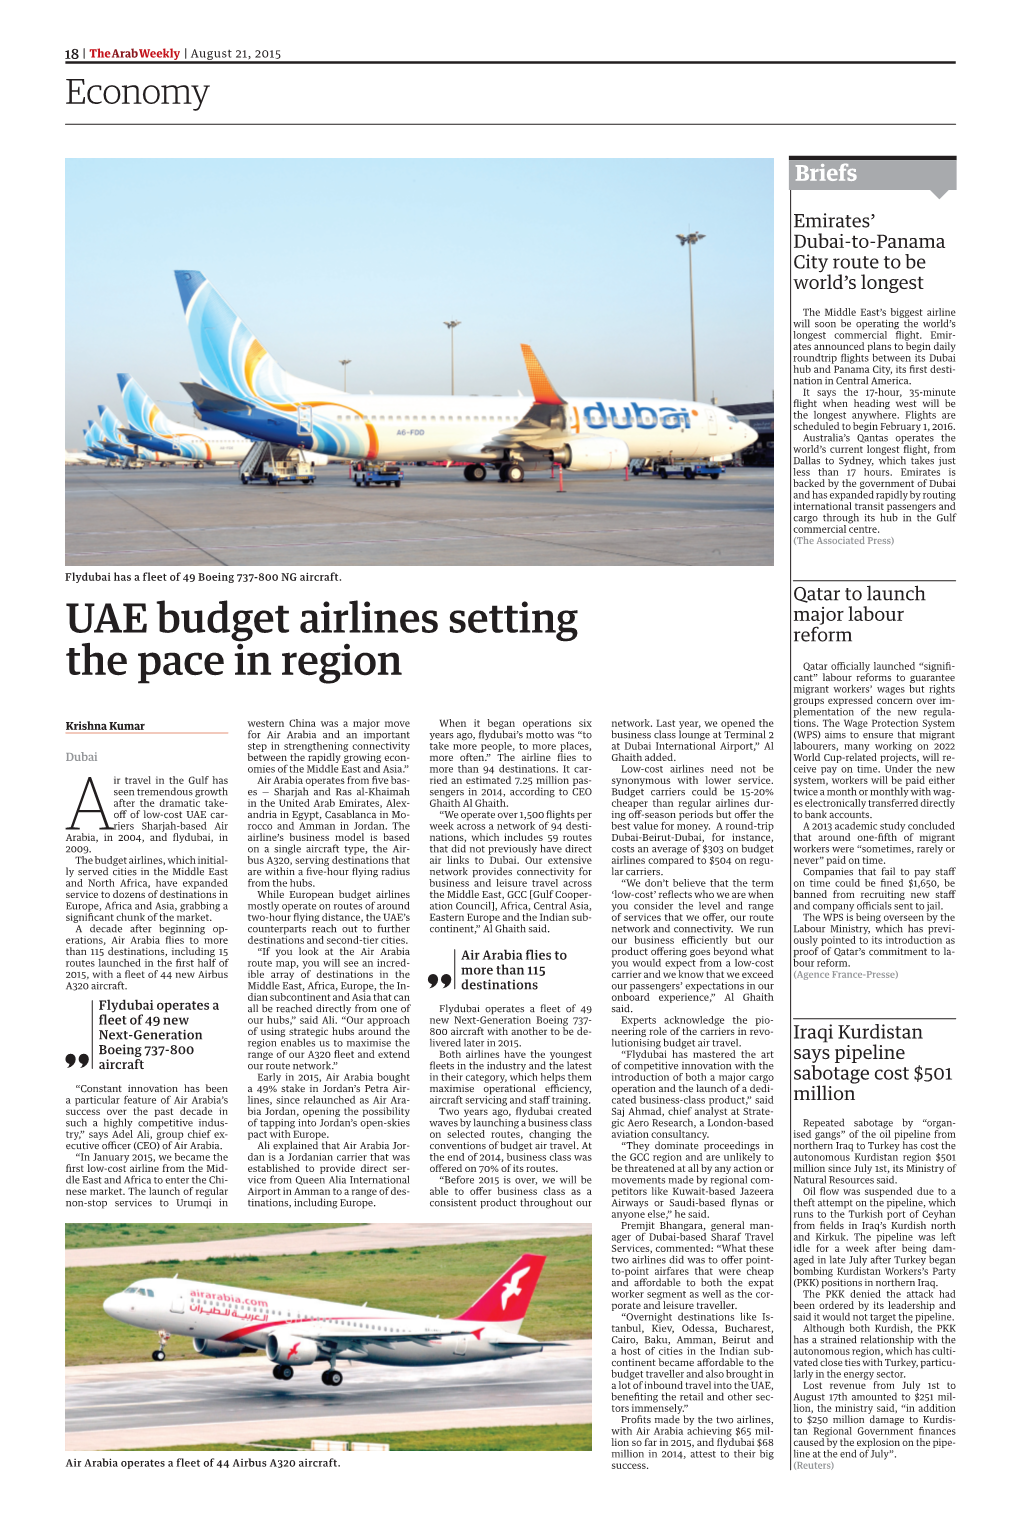 UAE Budget Airlines Setting the Pace in Region